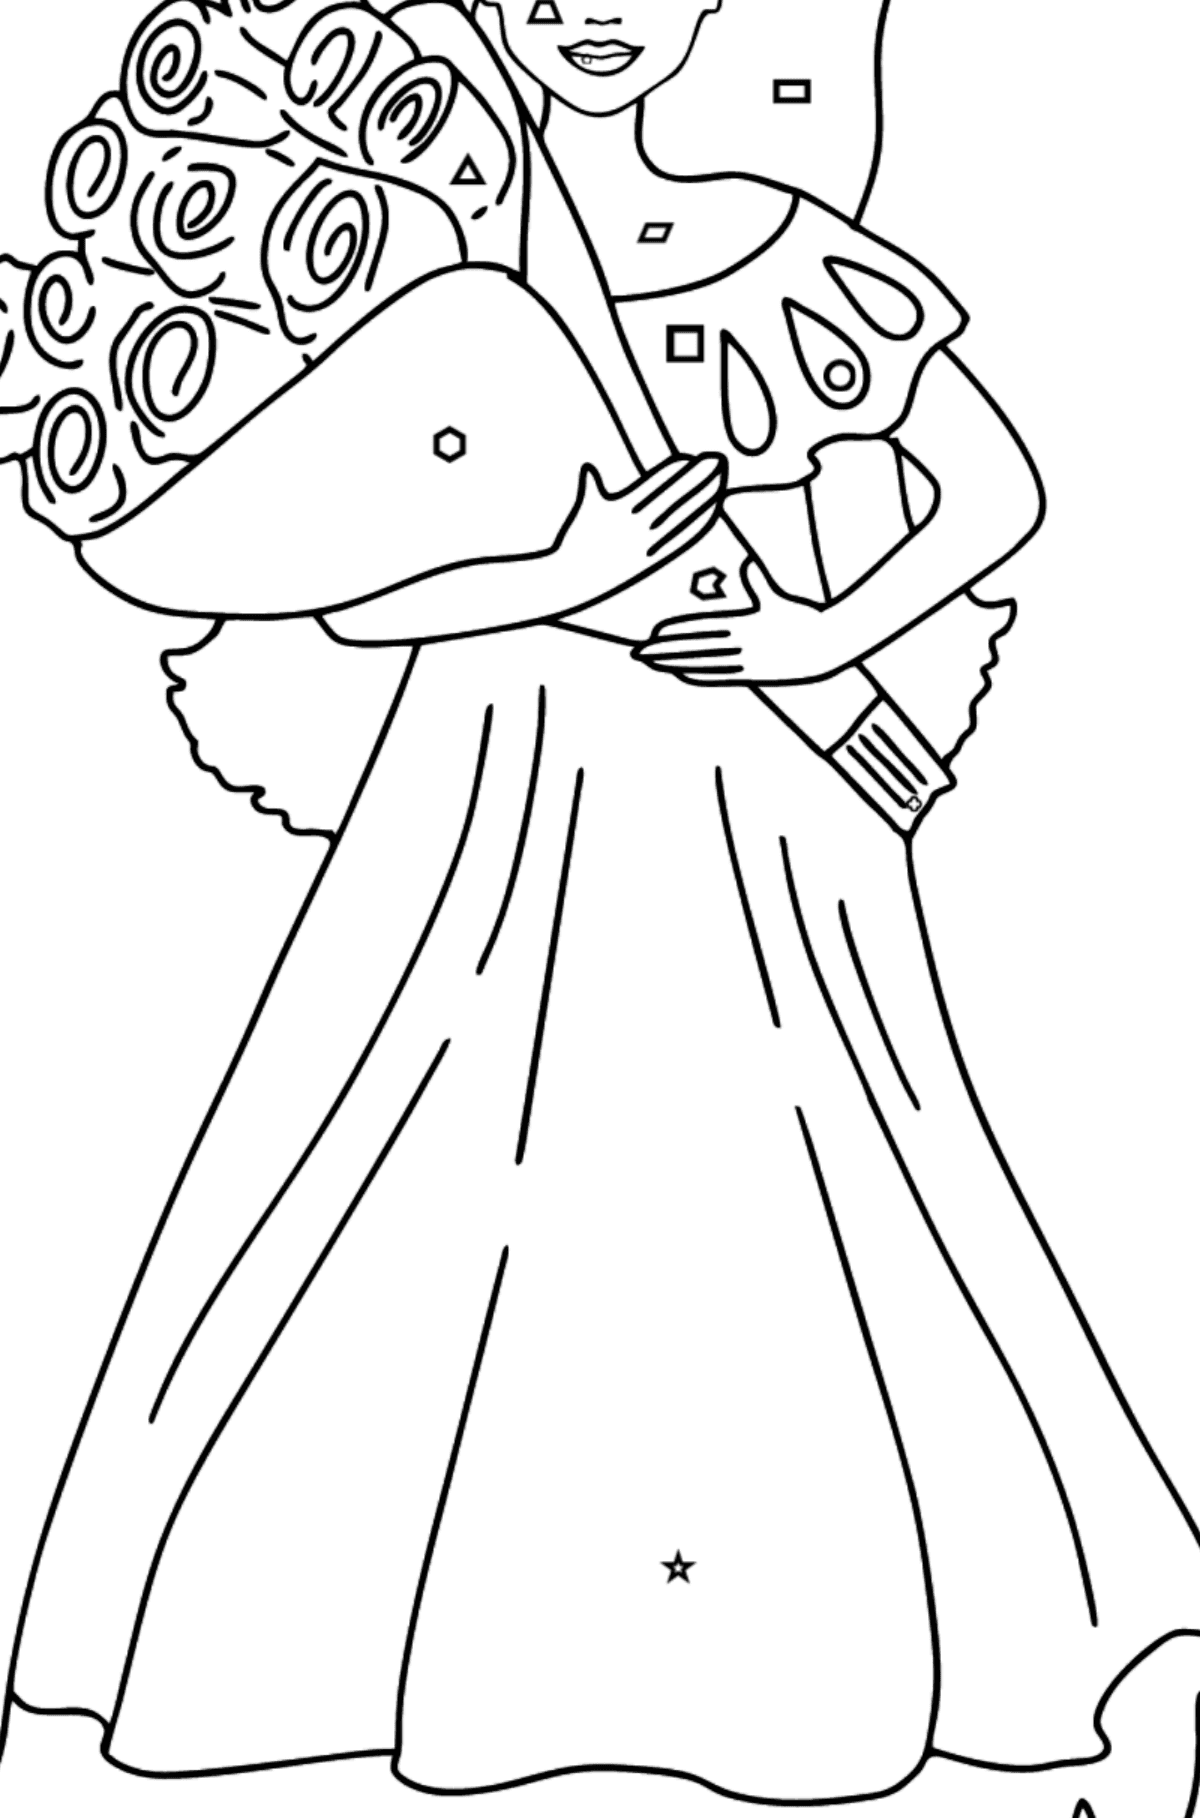 Barbie Doll and a Bouquet of Roses coloring page - Coloring by Geometric Shapes for Kids